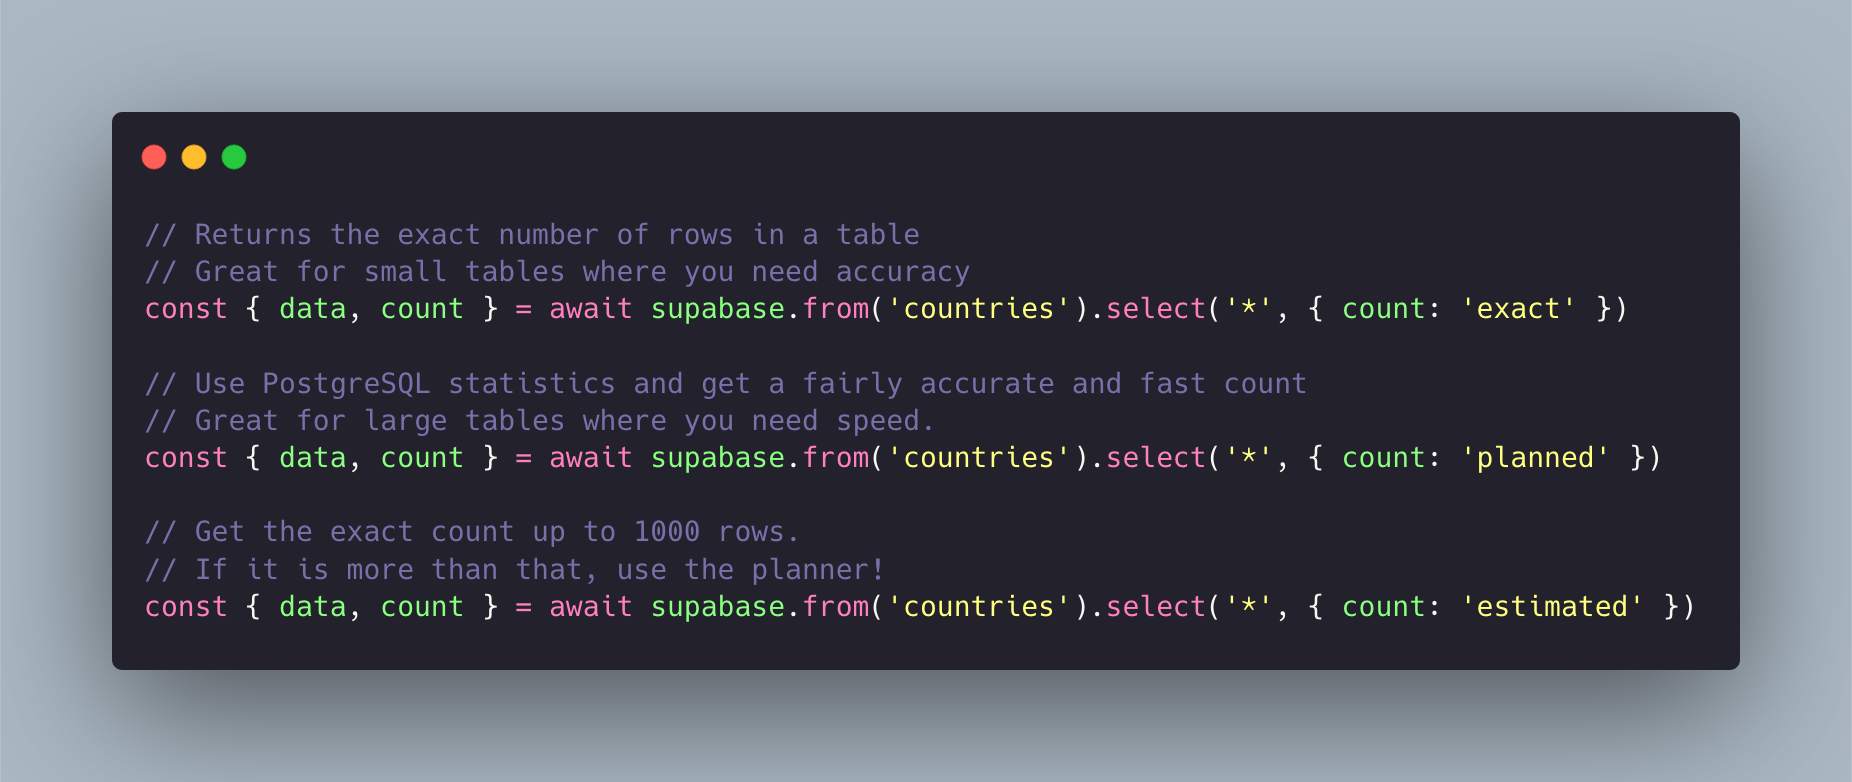 Supabase now supports count functionality